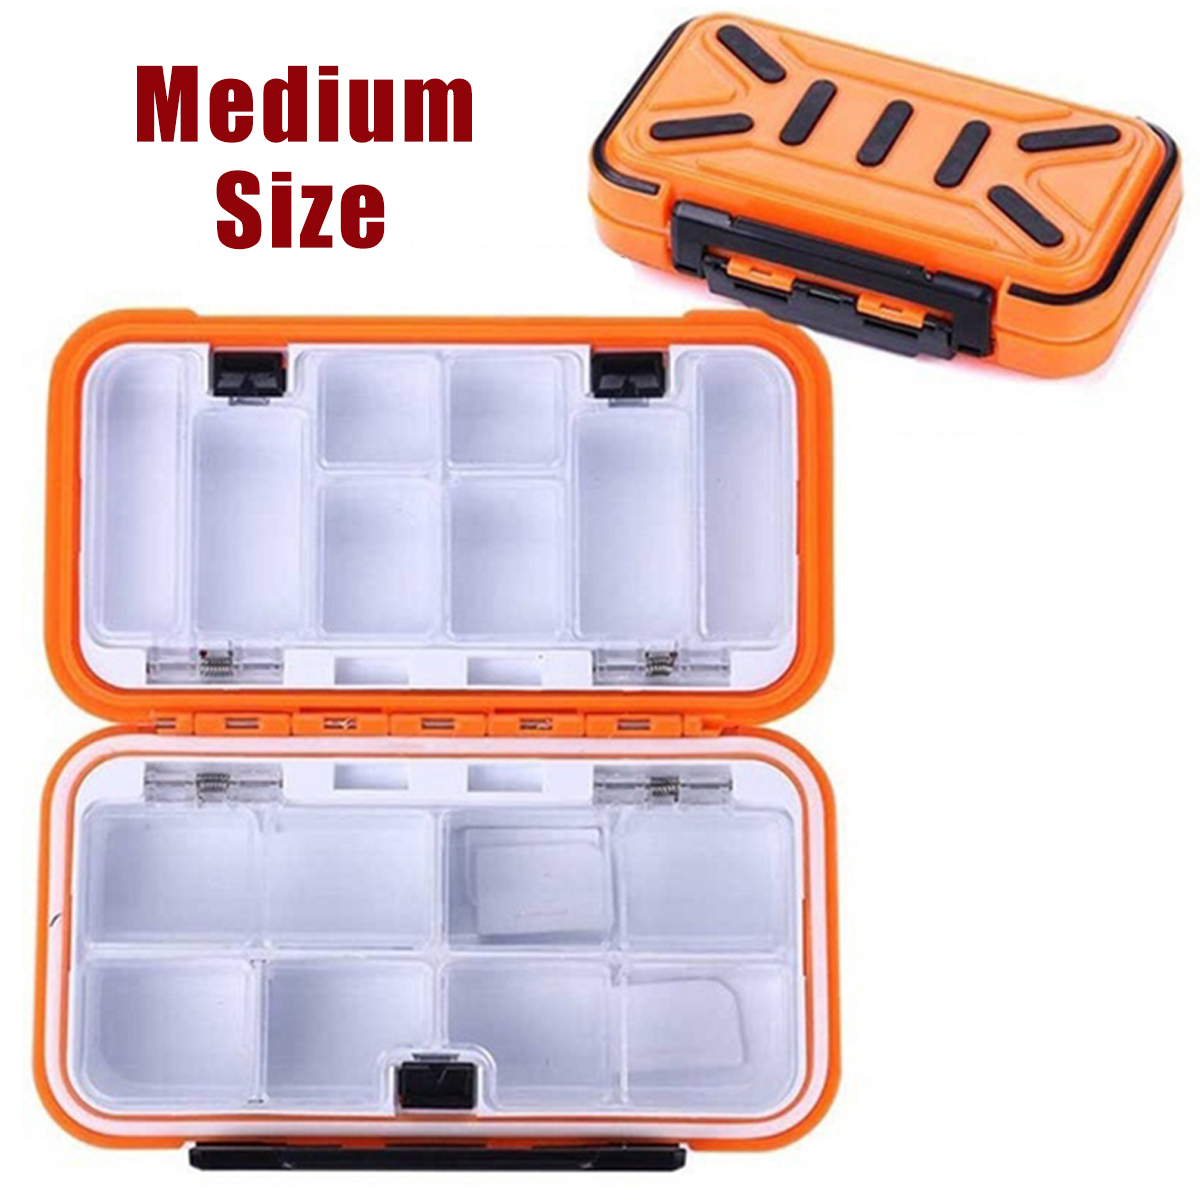 Sealed-Waterproof-Fishing-Tackle-Tray-ABS-Plastic-Fishing-Accessories-Box-Swivel-Snap-Lure--Parts-St-1634862-5